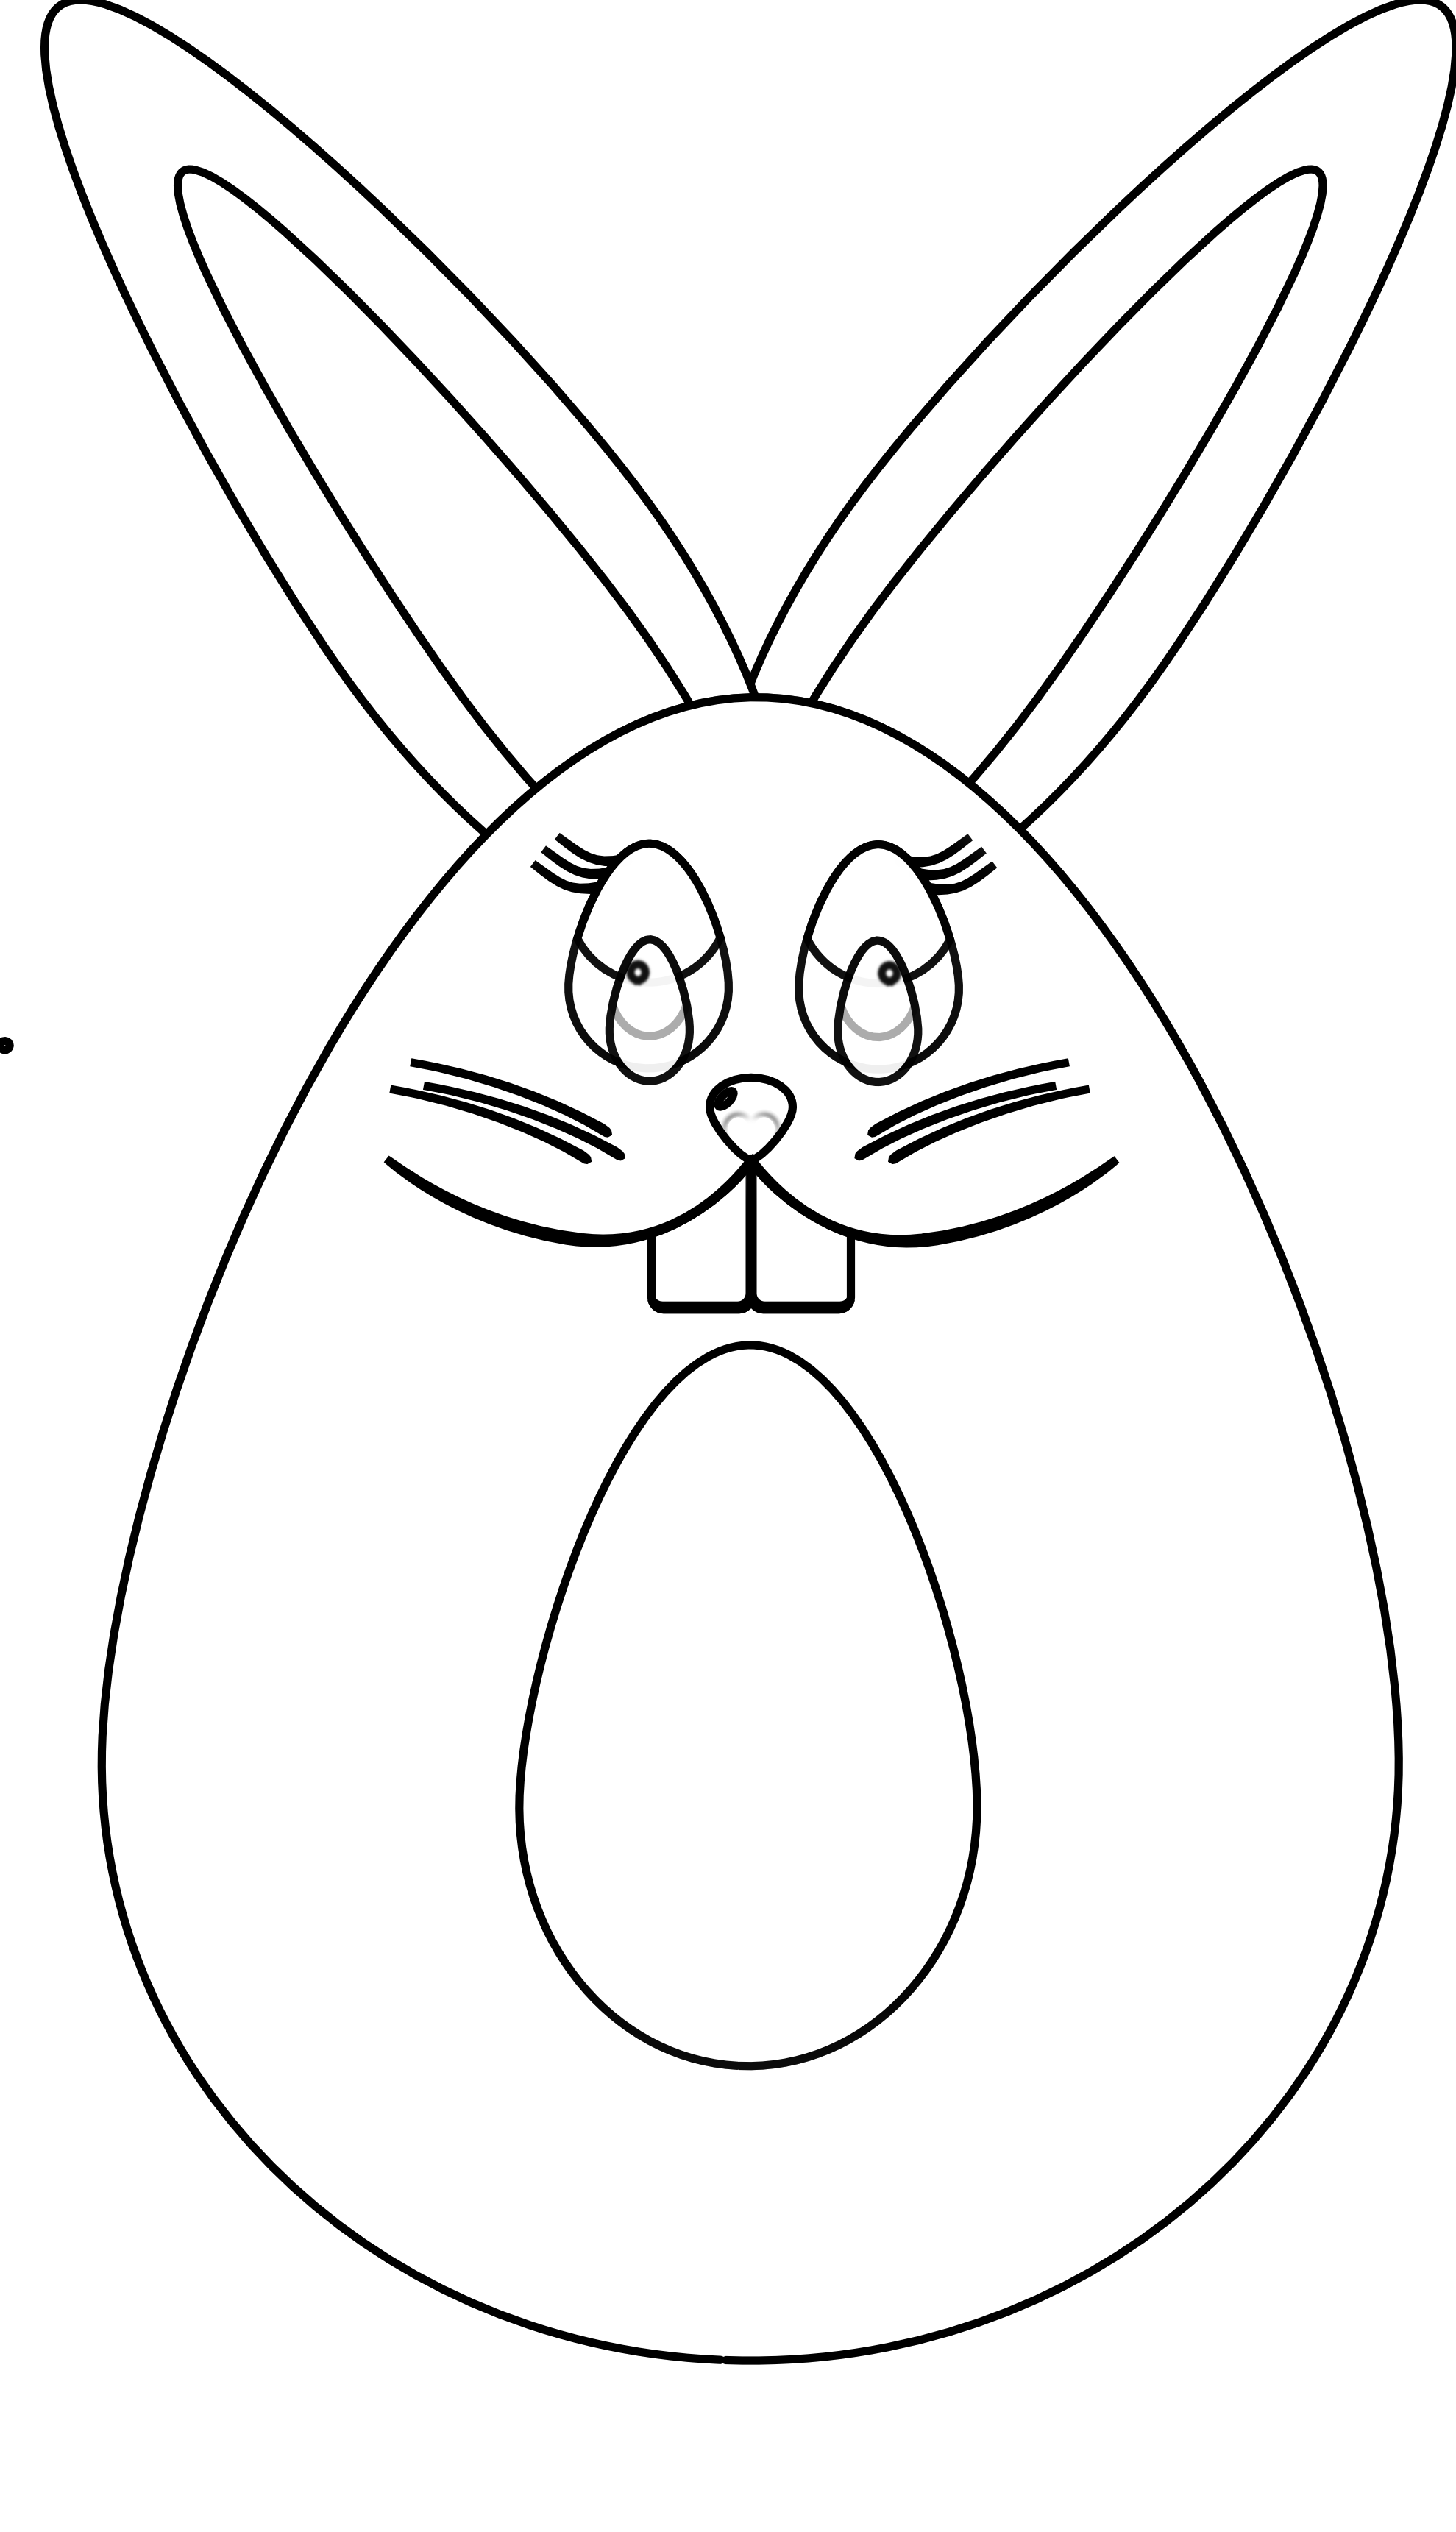 Easter Bunny With Eggs Clipart Black And White Zz Egg Bunny Grey